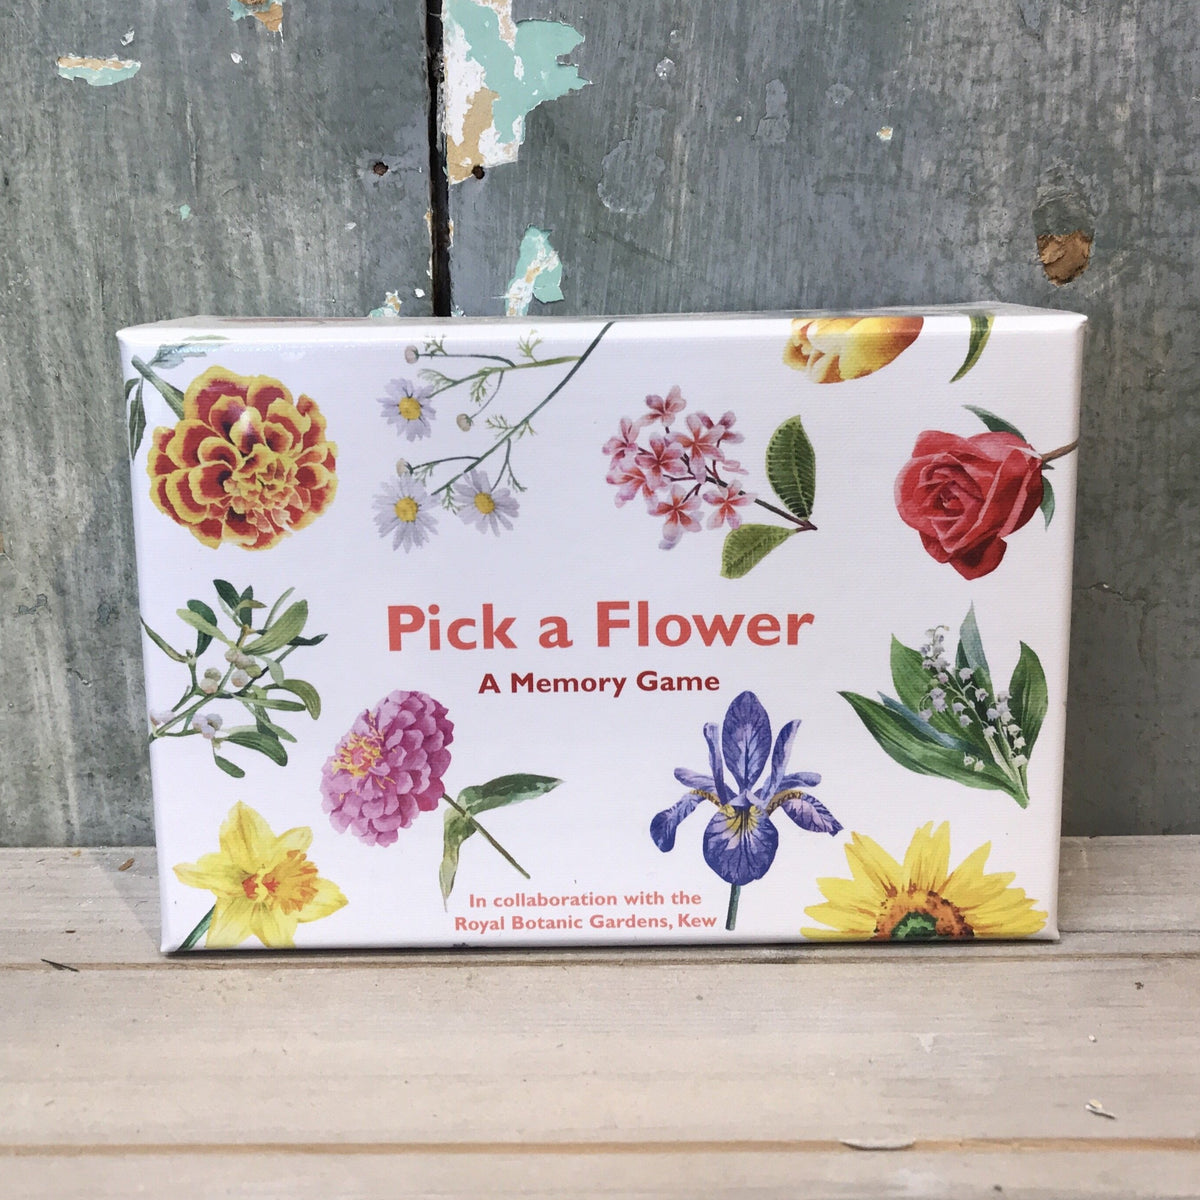 Pick a Flower - A Memory Game